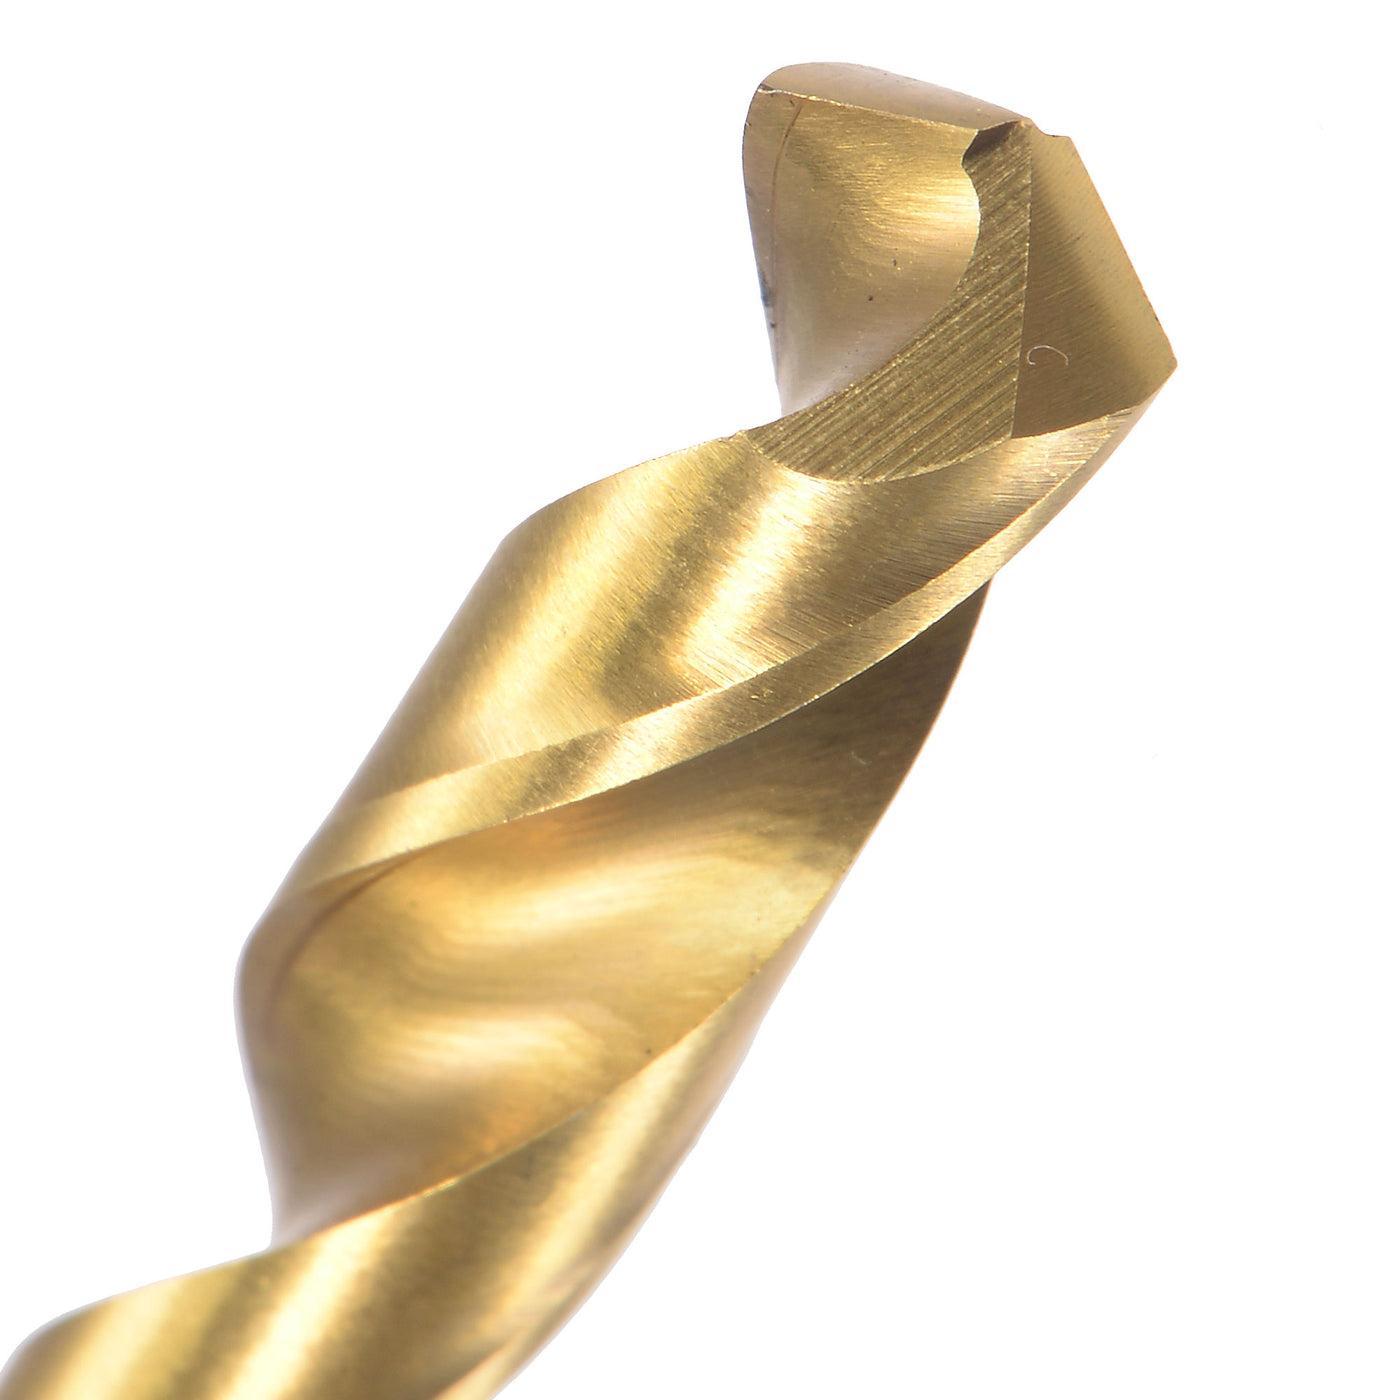 uxcell Uxcell High Speed Steel Twist Drill Bit 7.5mm Fully Ground Titanium Coated